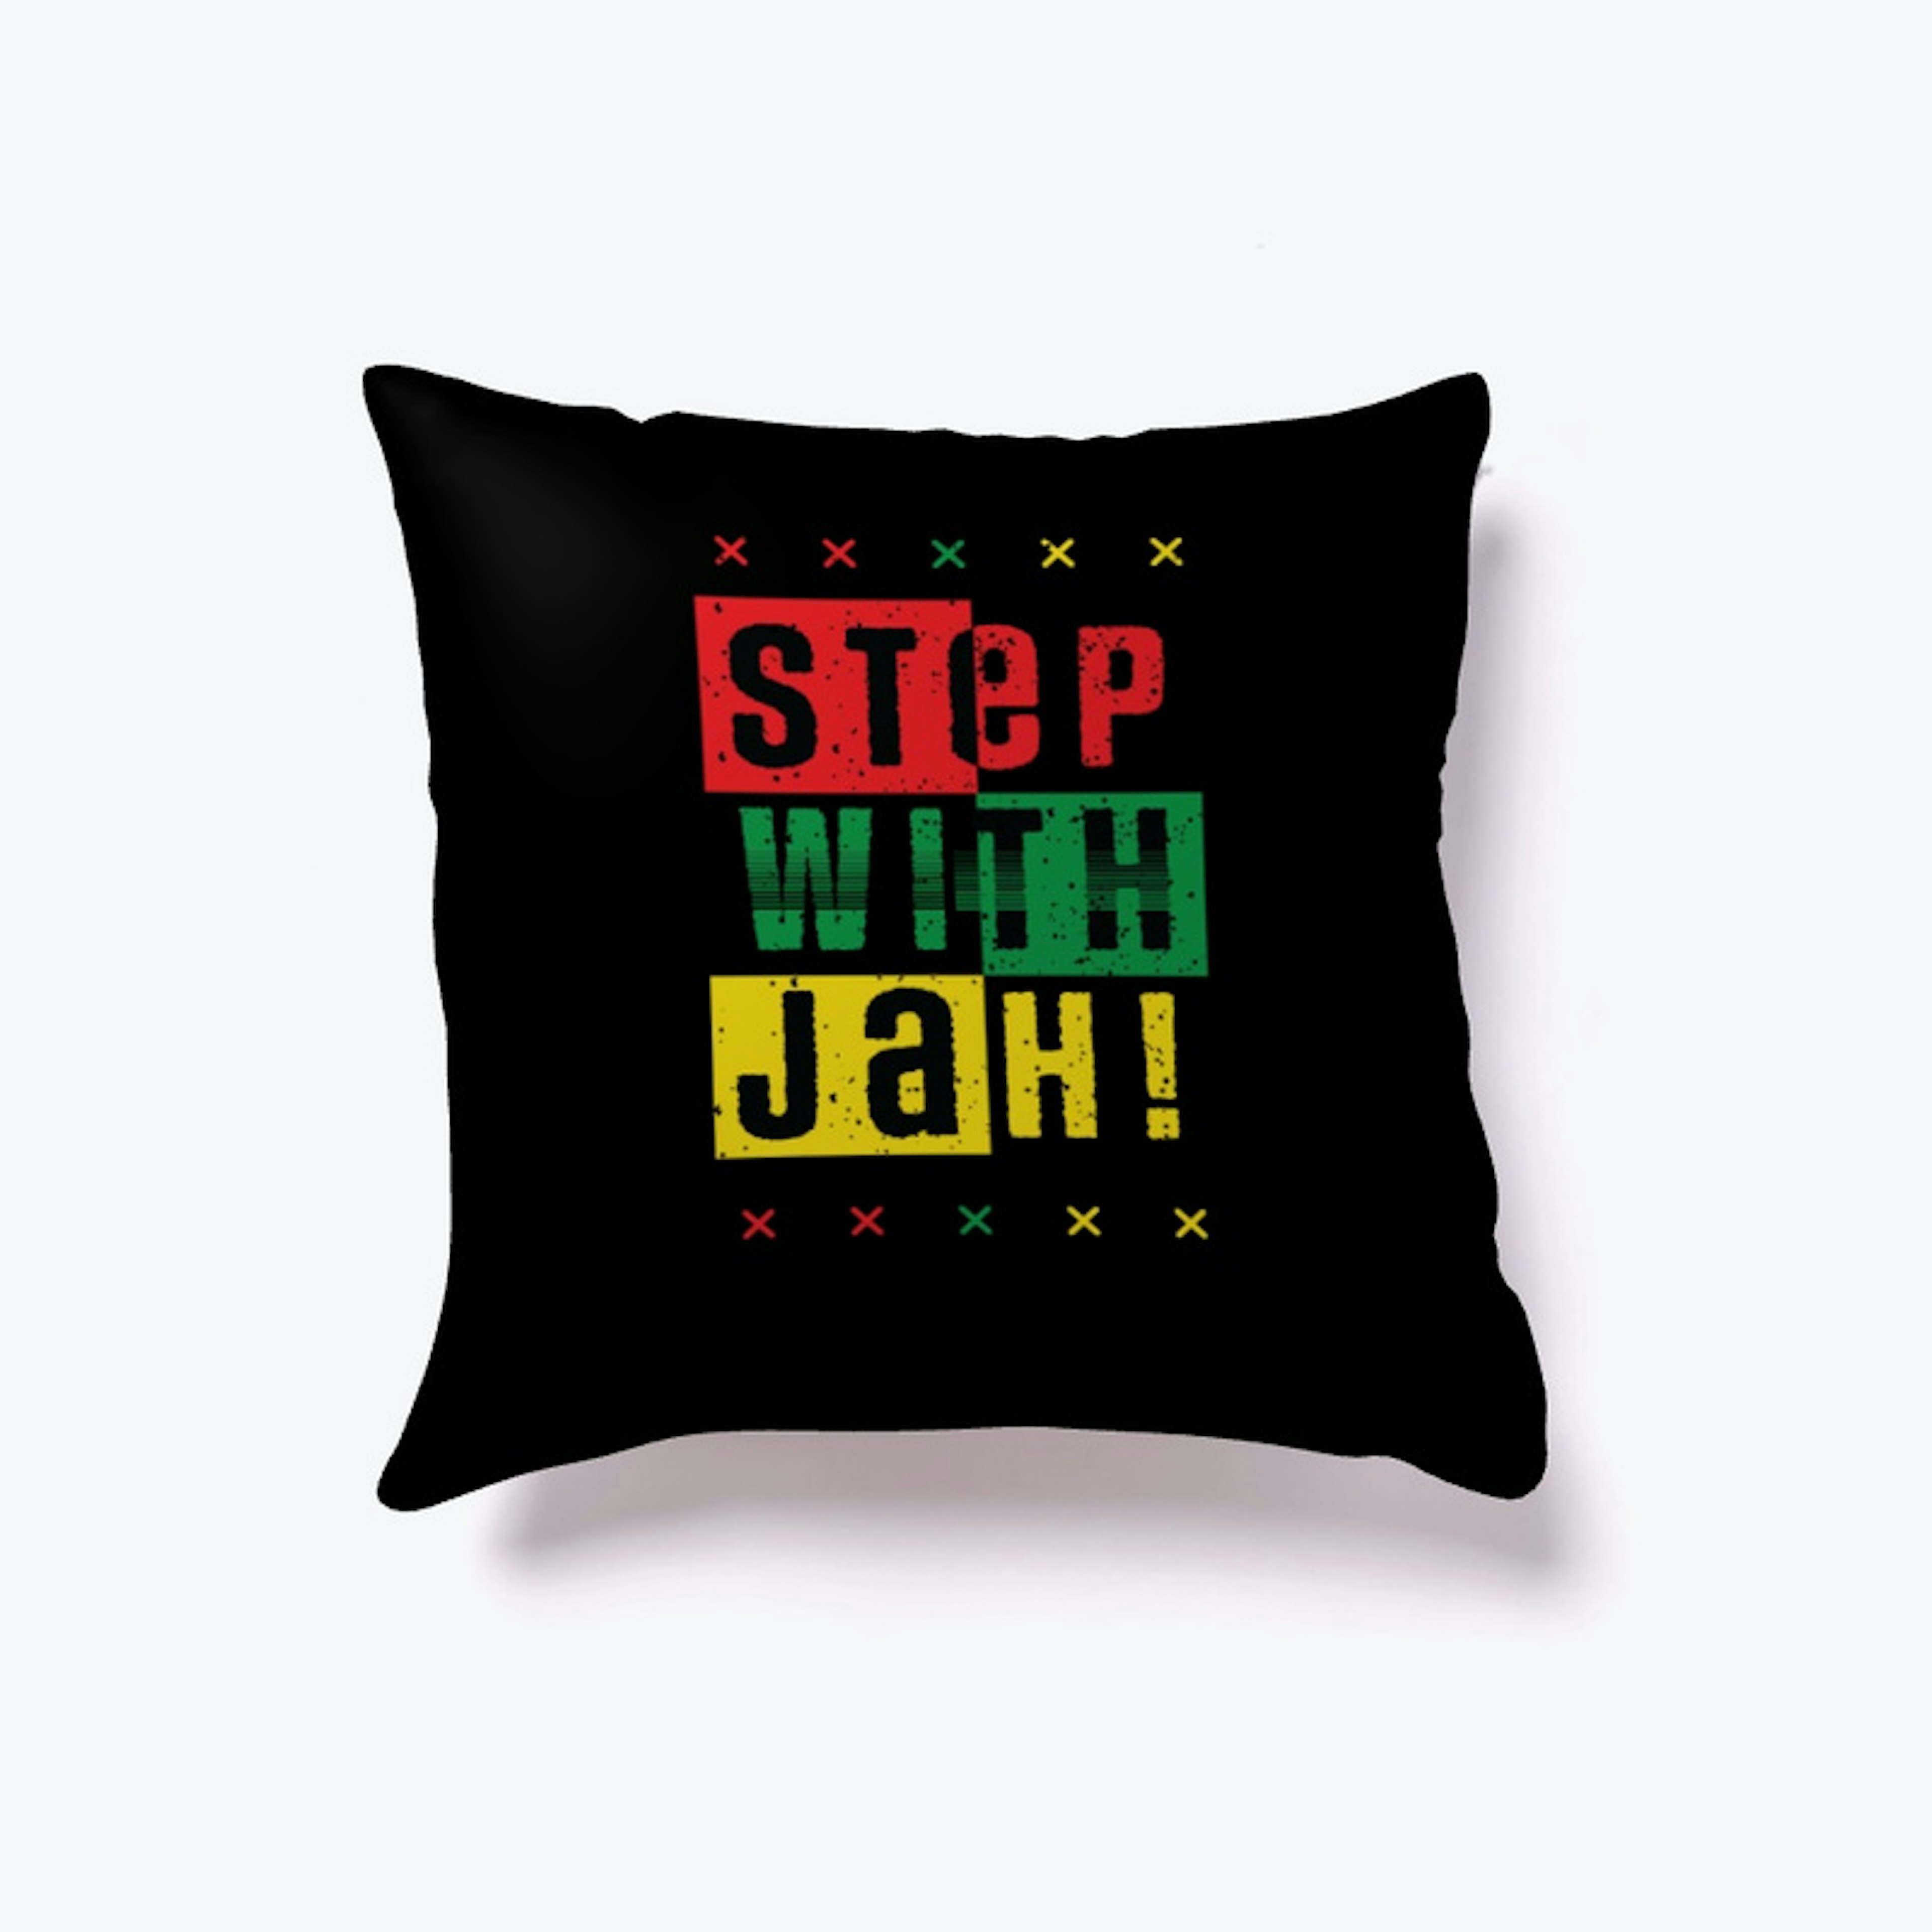 STEP WITH JAH